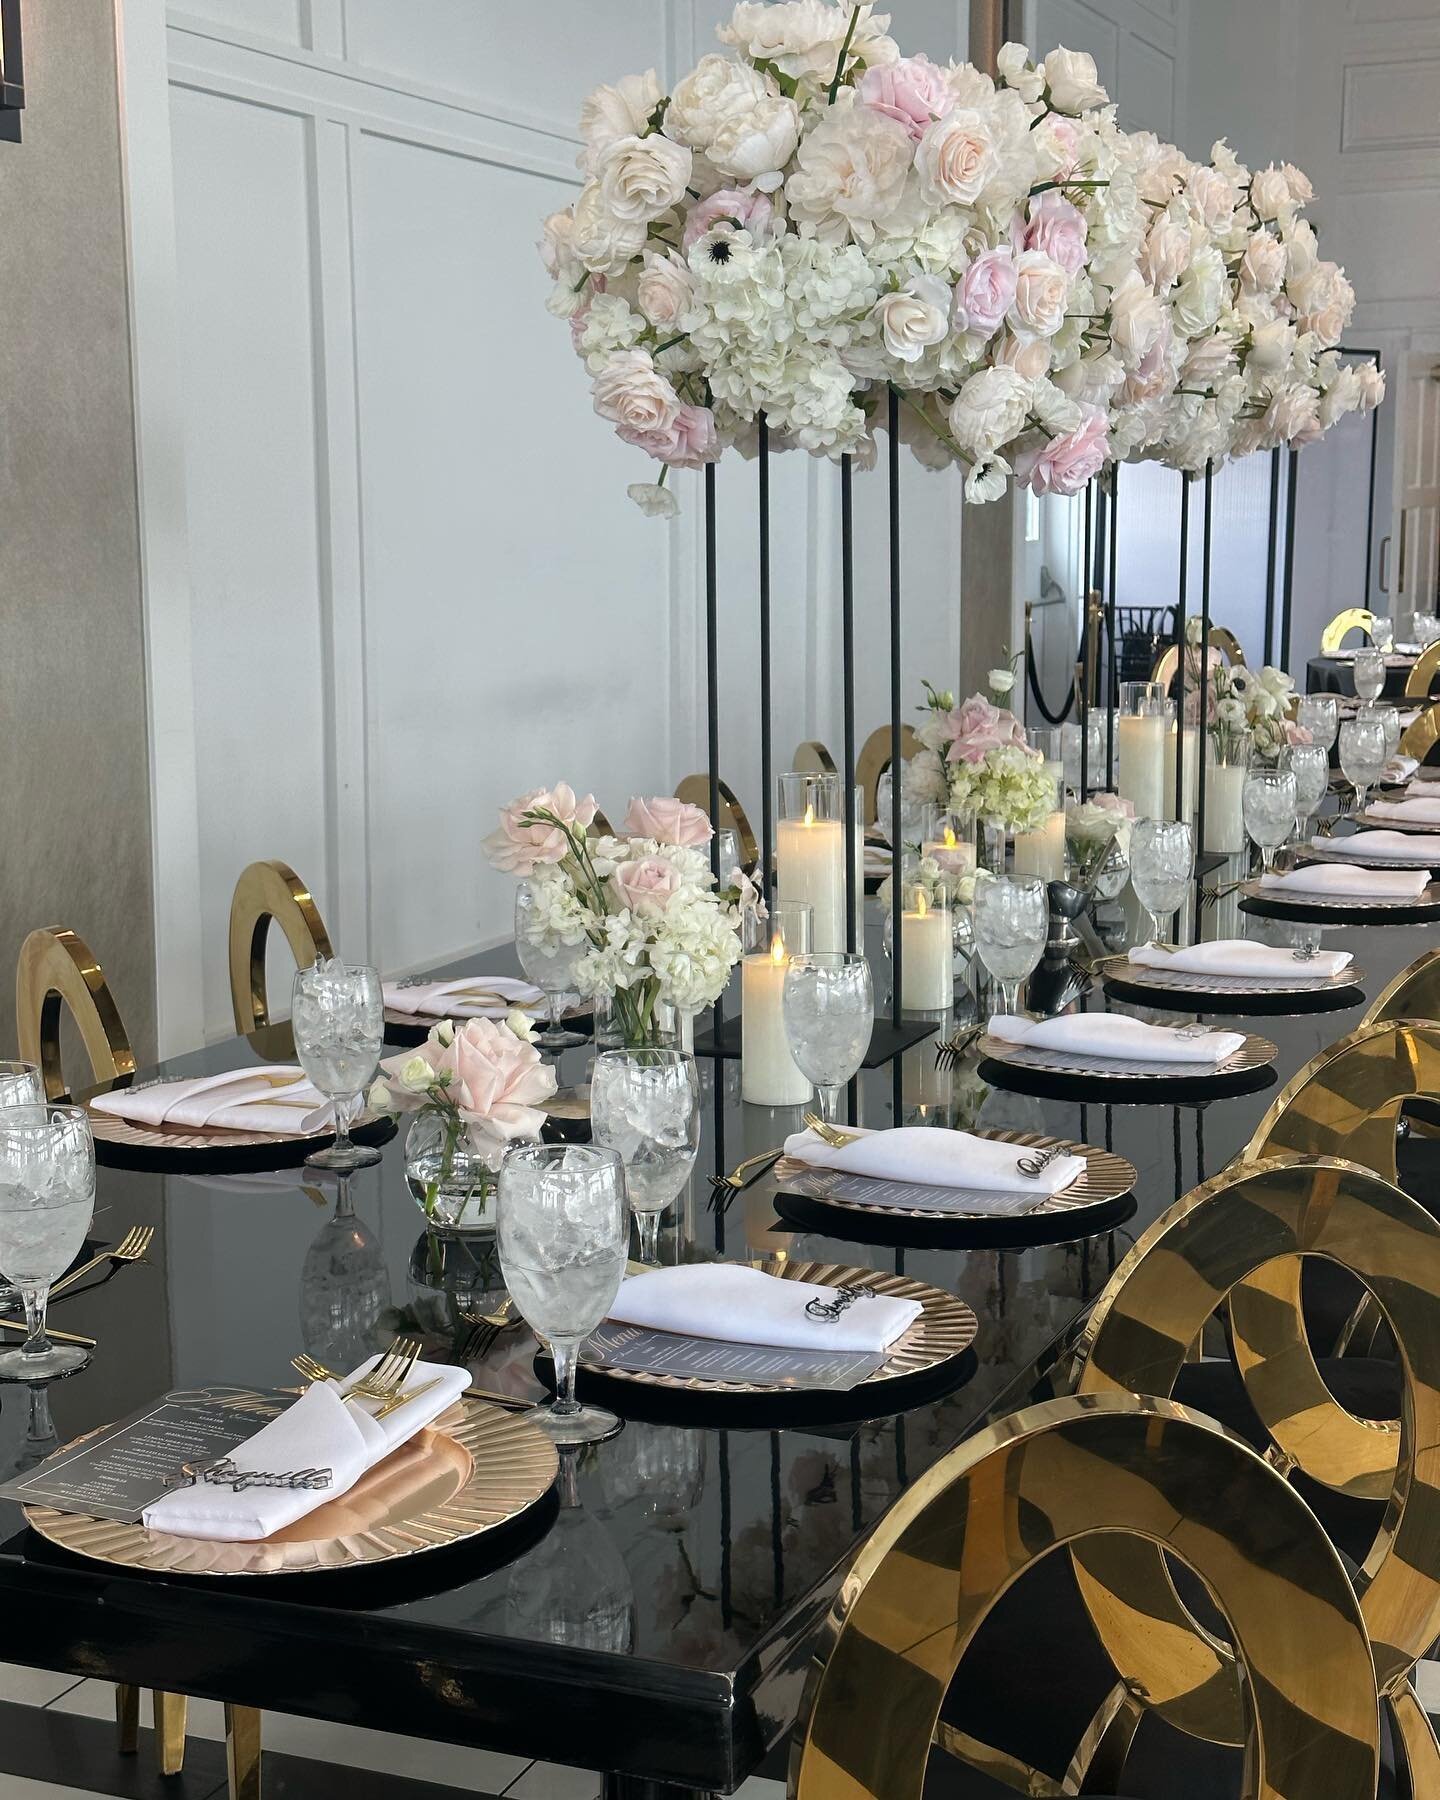 We love a soft color palette for Weddings. Soft whites and pinks are always a great combination when using dark colors. My bride was very adamant about these colors and we made sure to deliver.

#poshluxuryevents #luxuryevents #luxuryeventplanner #bi